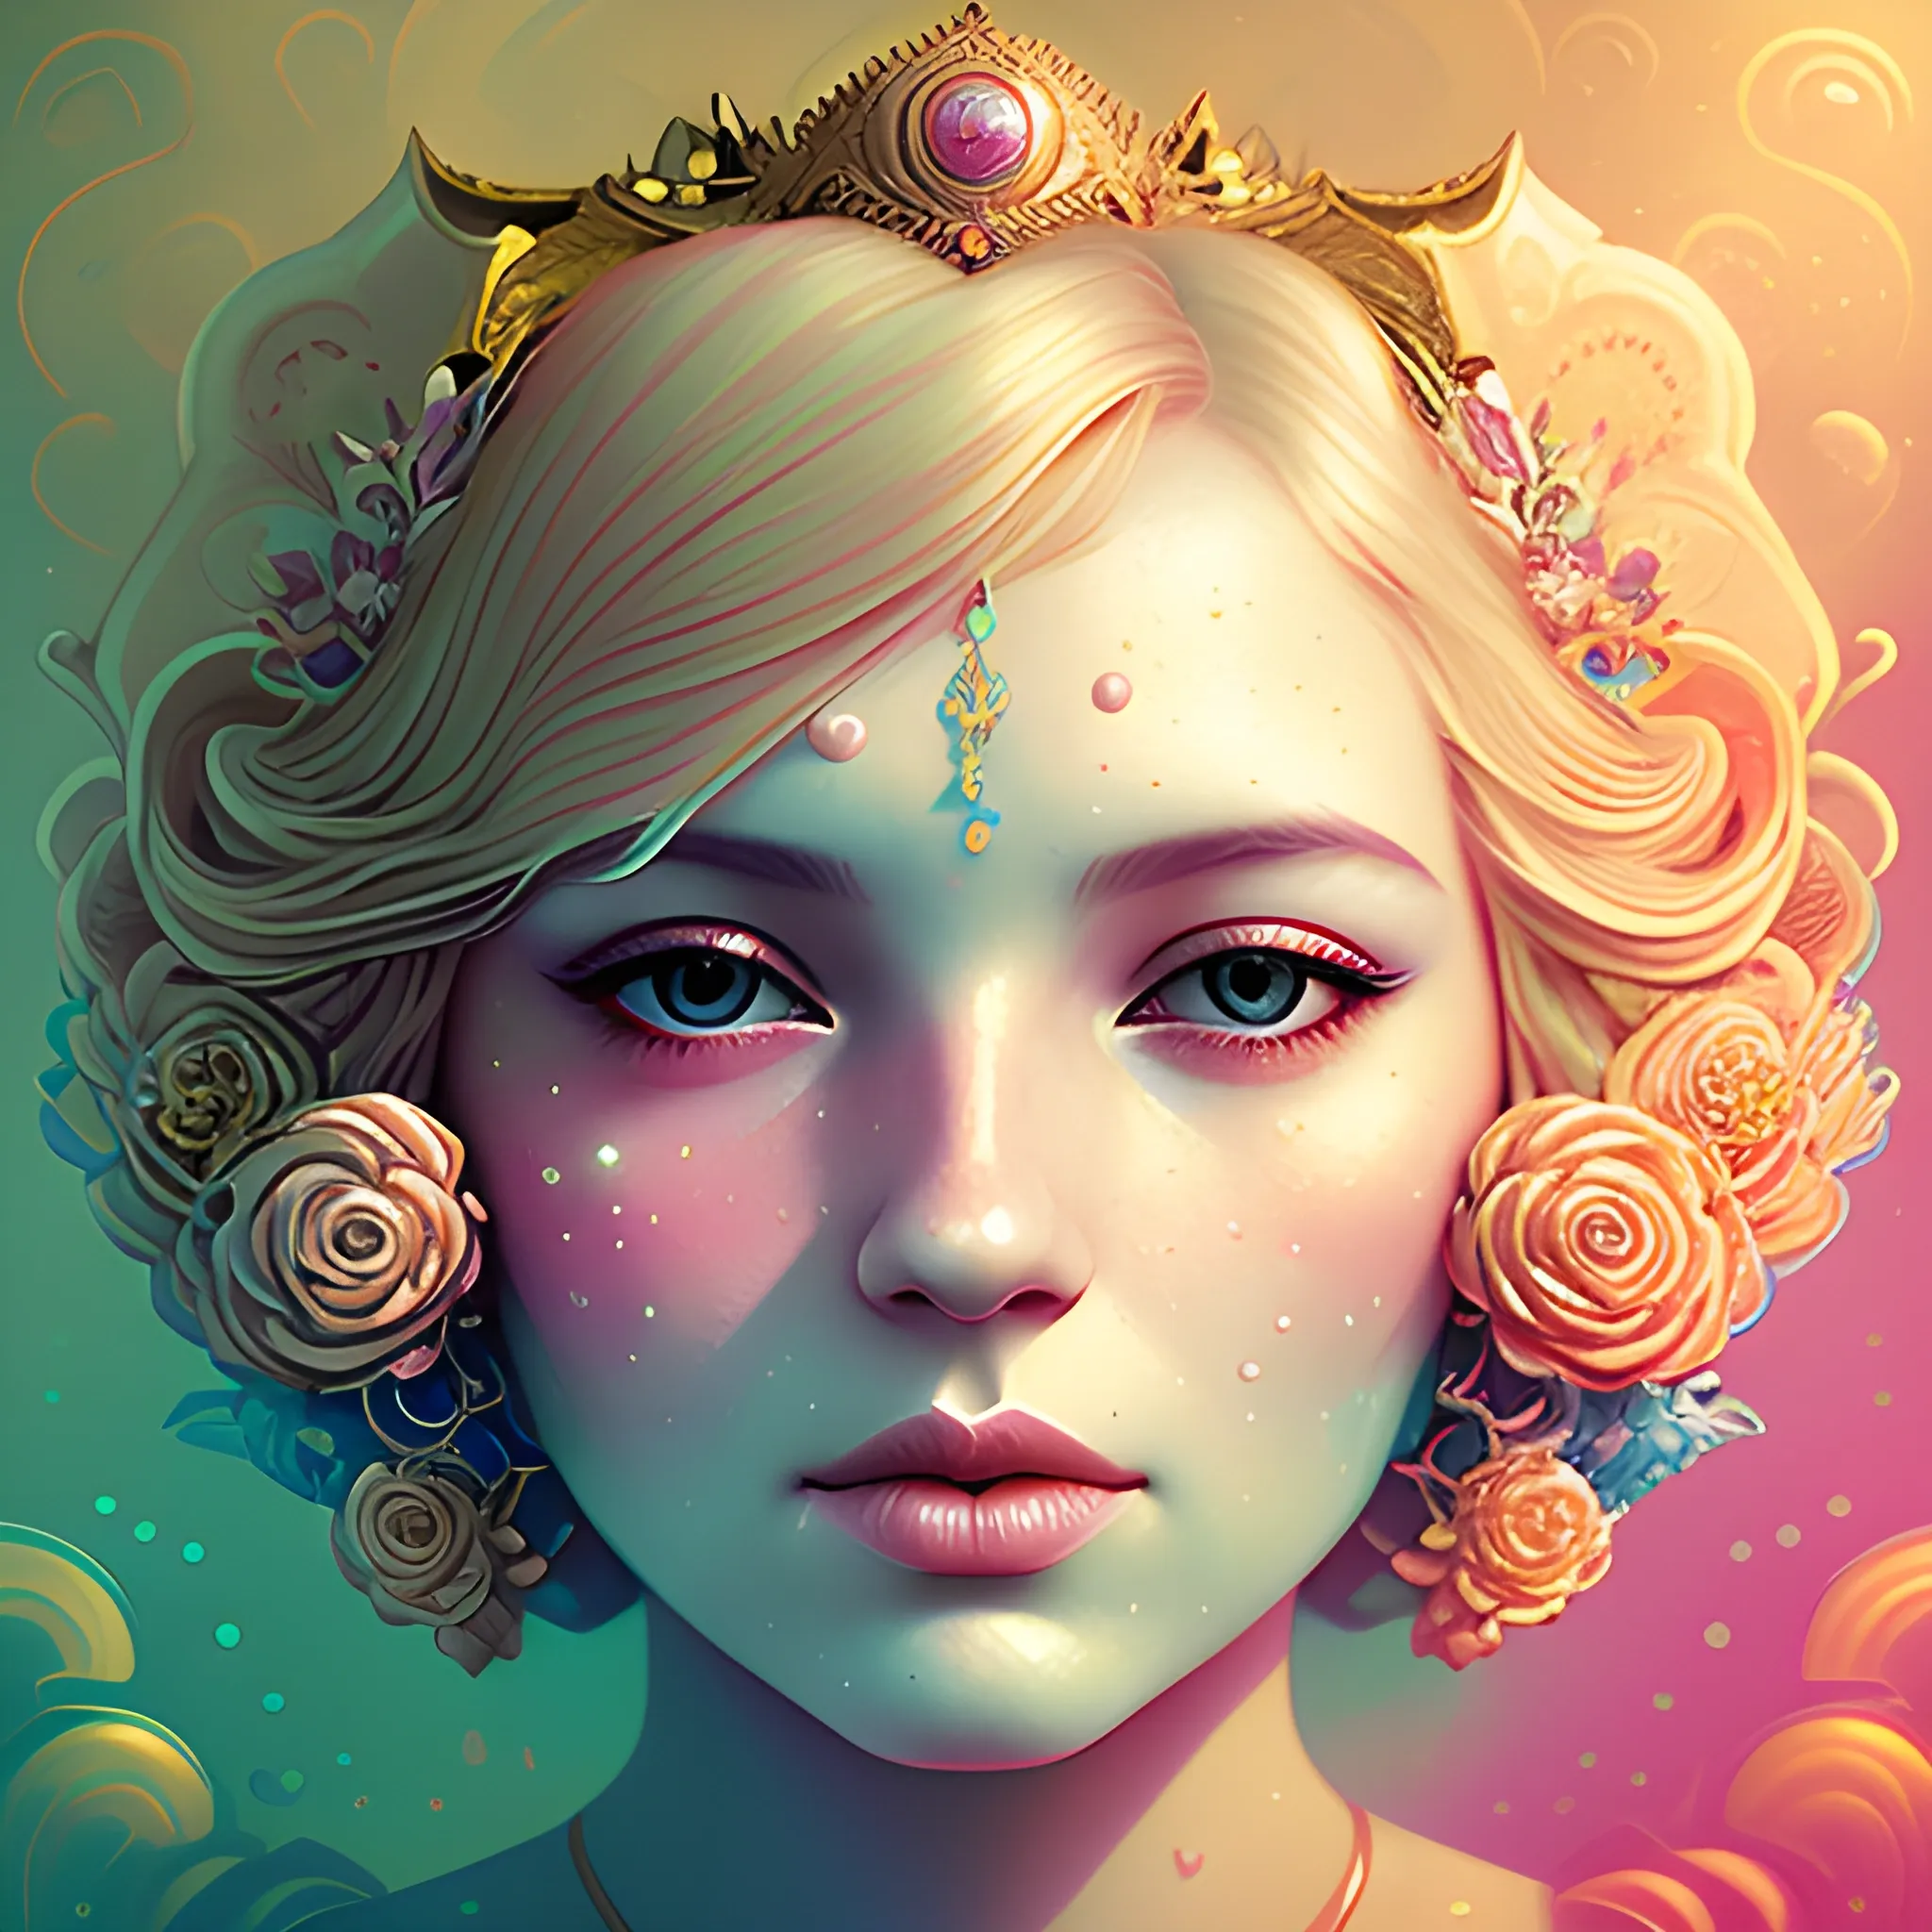 Flowery beautiful face blonde empress with gold jewellery, by petros afshar, ross tran, Tom Bagshaw, tom whalen, underwater bubbly psychedelic clouds, Anaglyph 3D lens blur effect